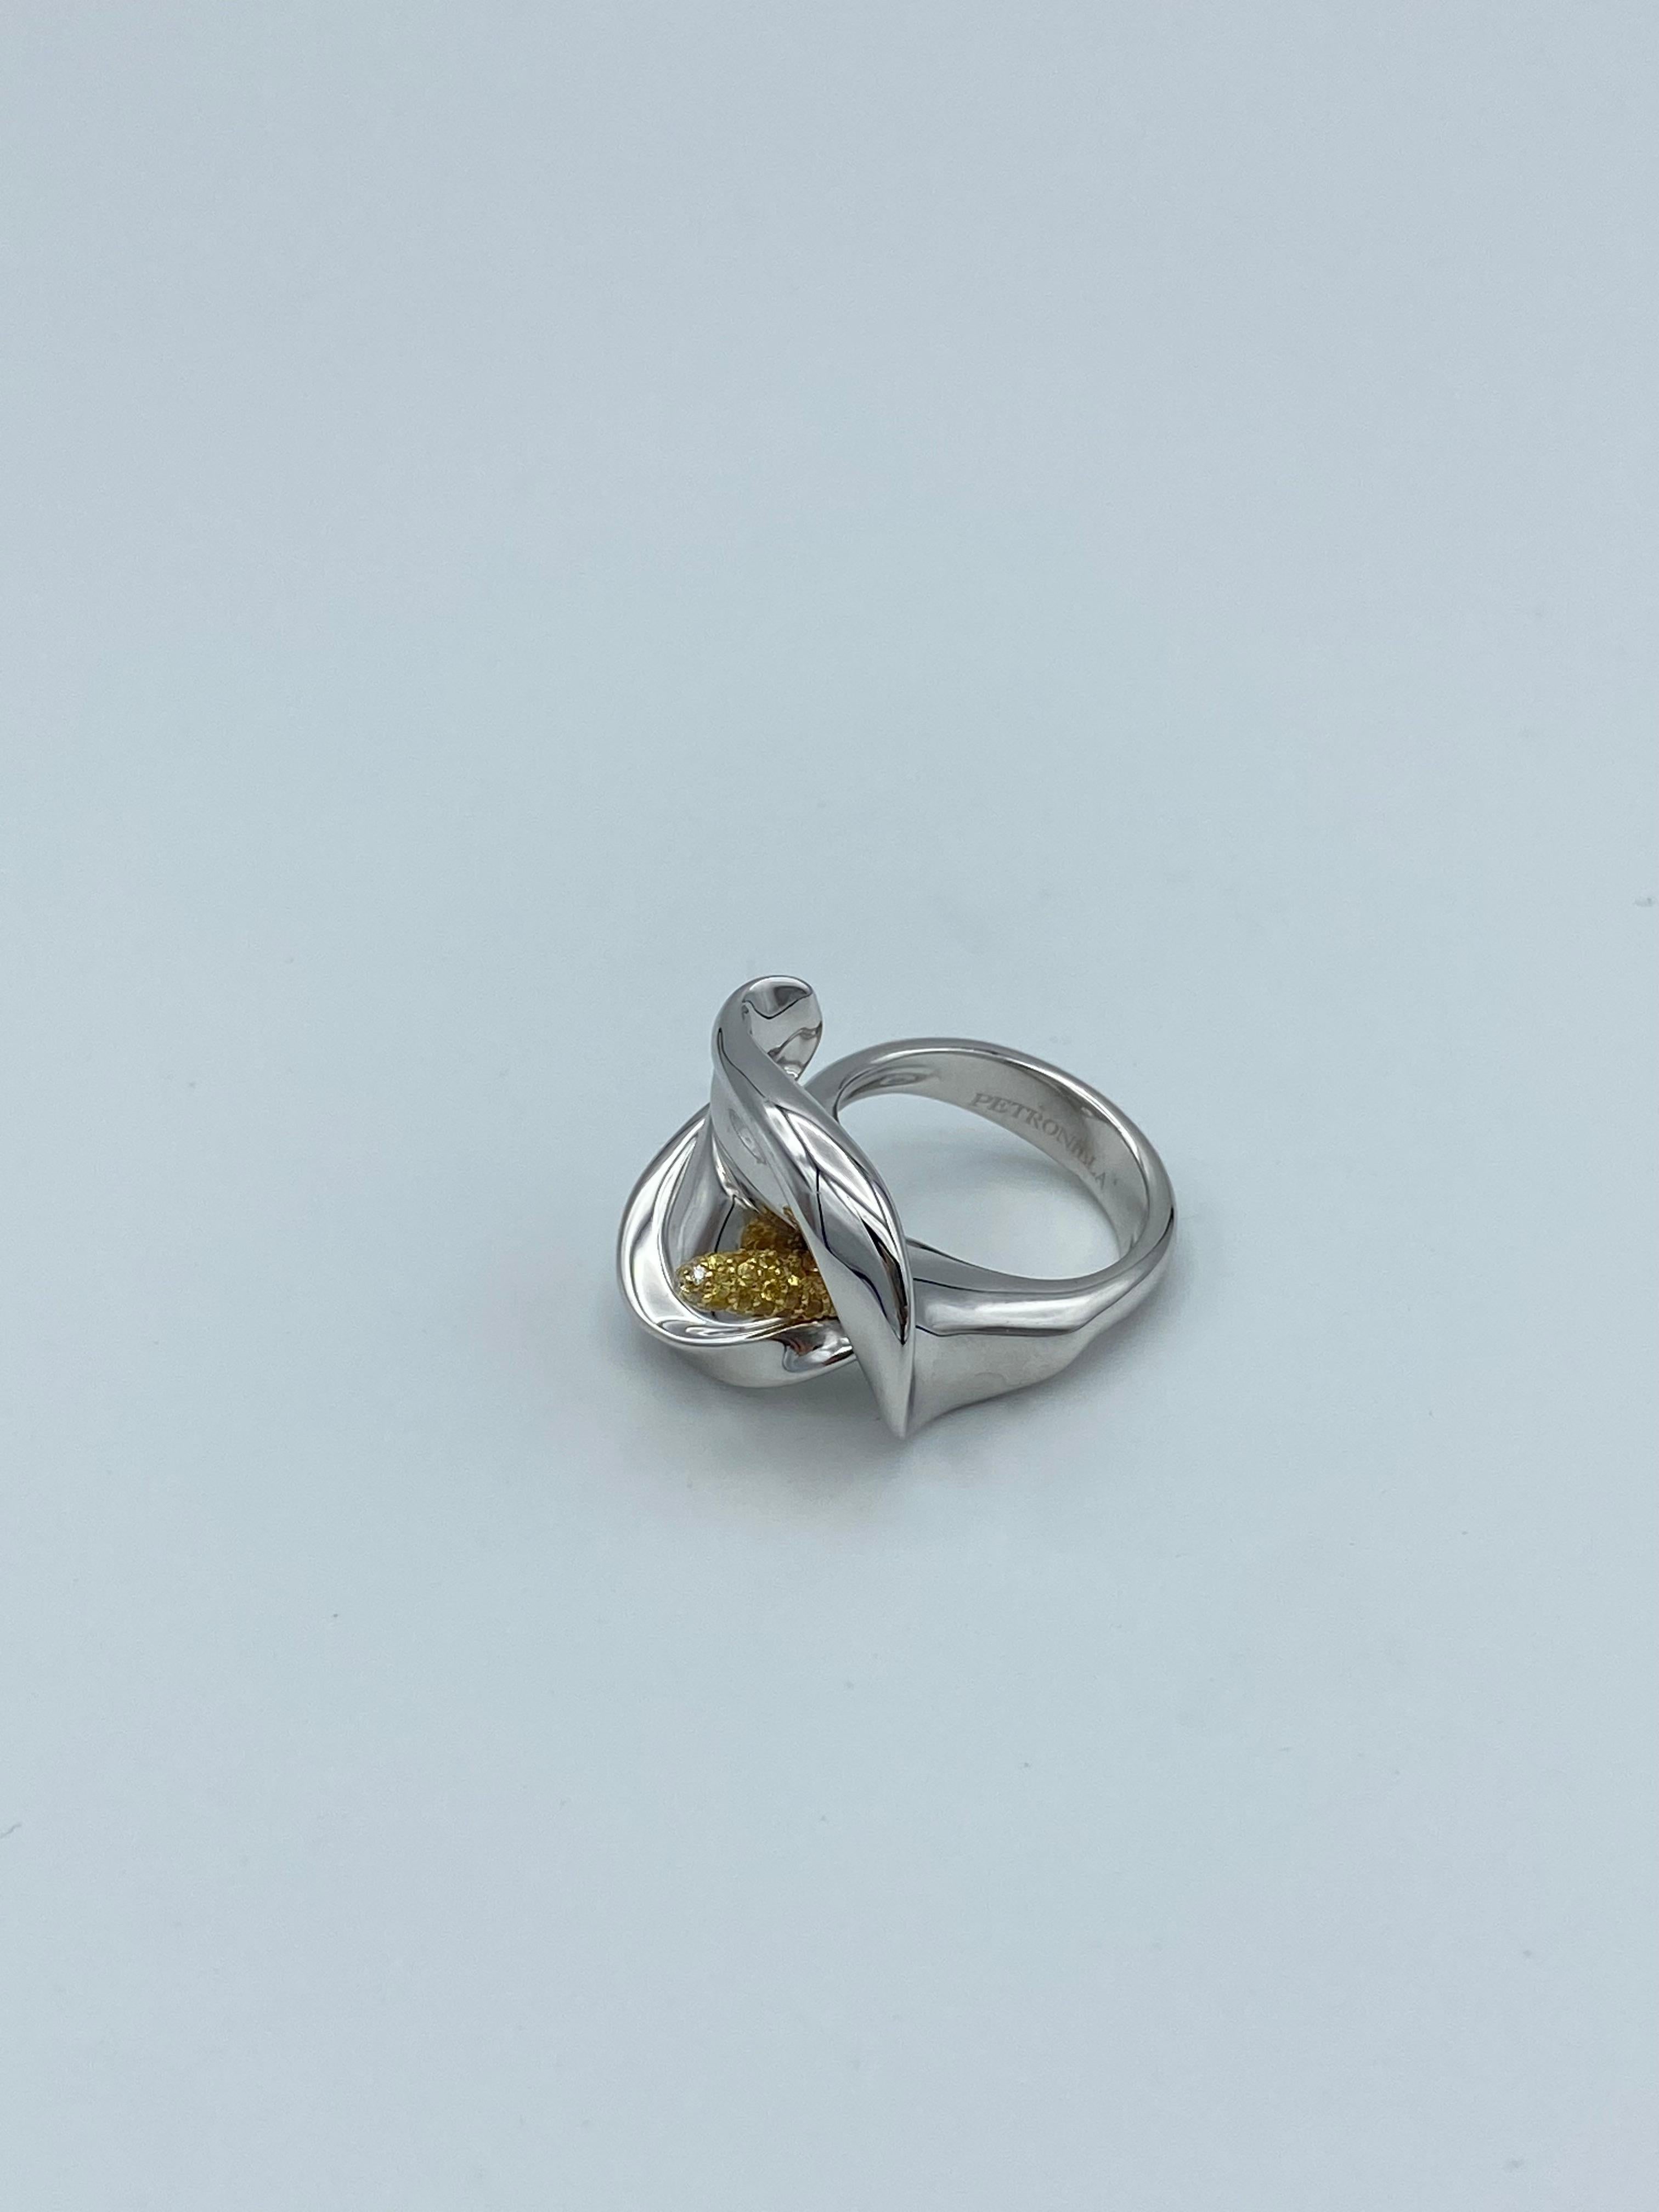 Calla White Diamond Yellow Sapphire 18Kt Gold Ring Made in Italy
This unique and wonderful ring has been inspired by flowers and its head is a real calla for its volumes. The pistil has been created by diamonds and yellow sapphires in three